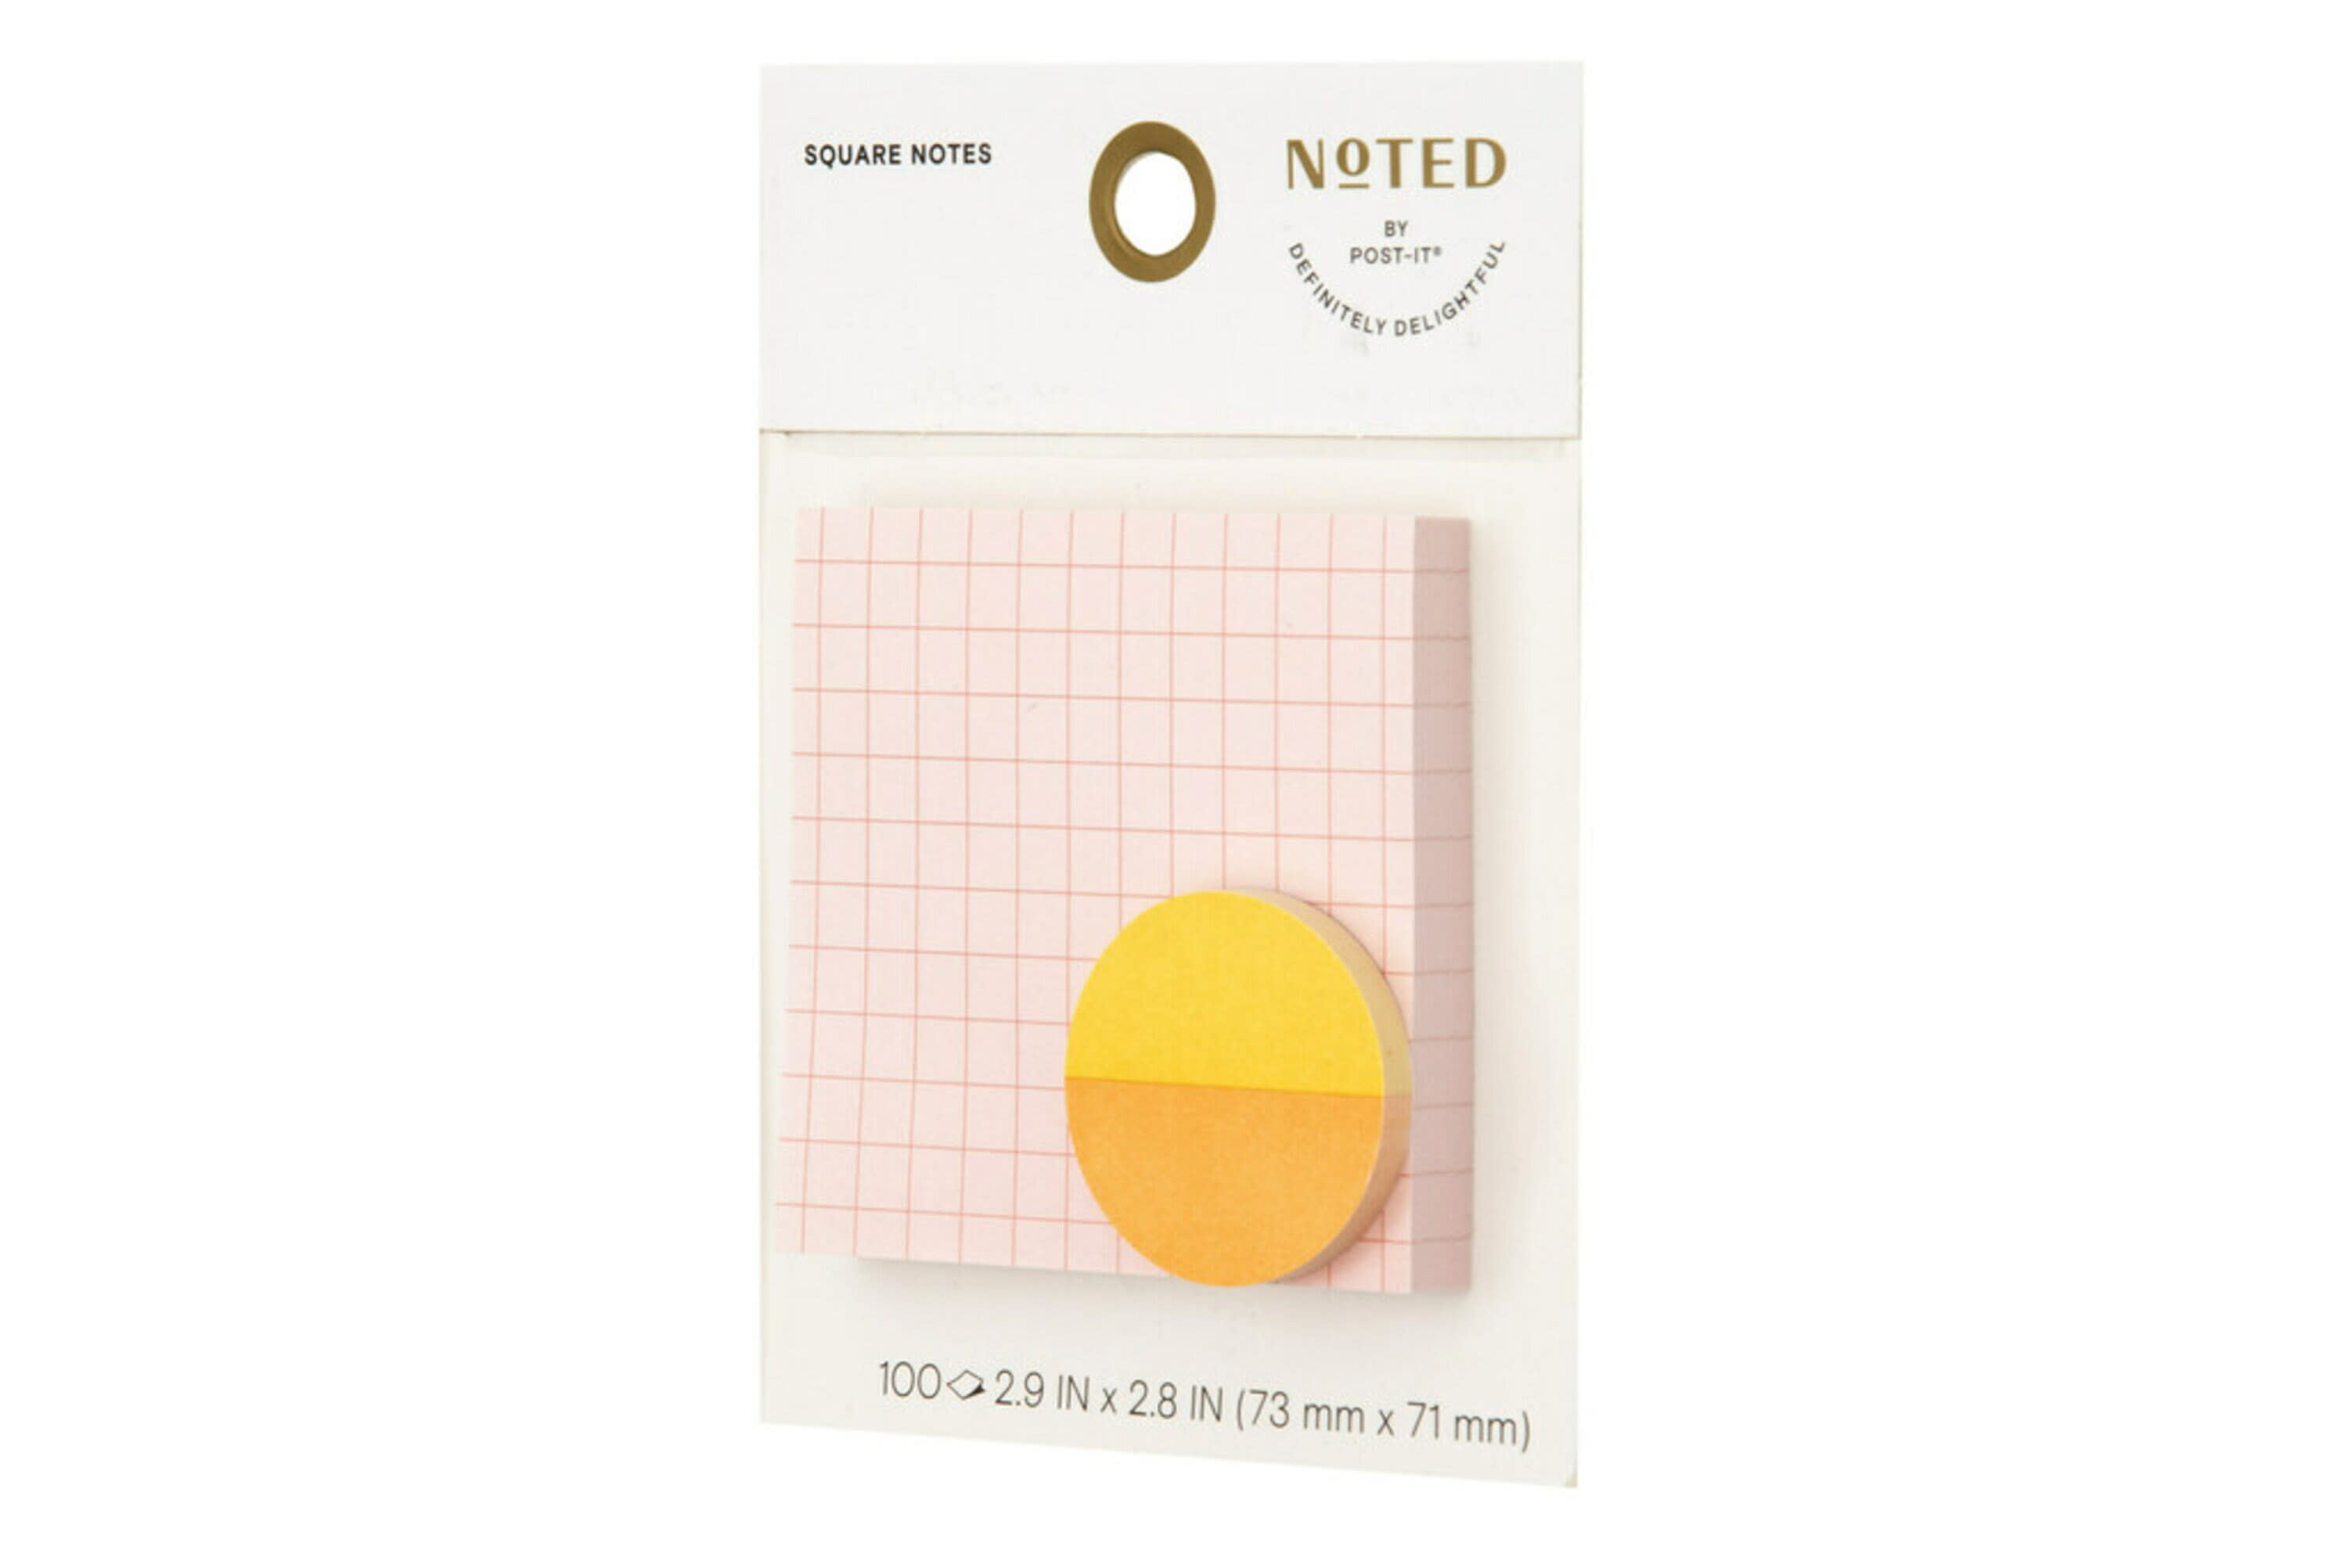 Noted by Post-it Notes, Blue and Green Square & Pink and Purple Round Shape, 100 Sheets